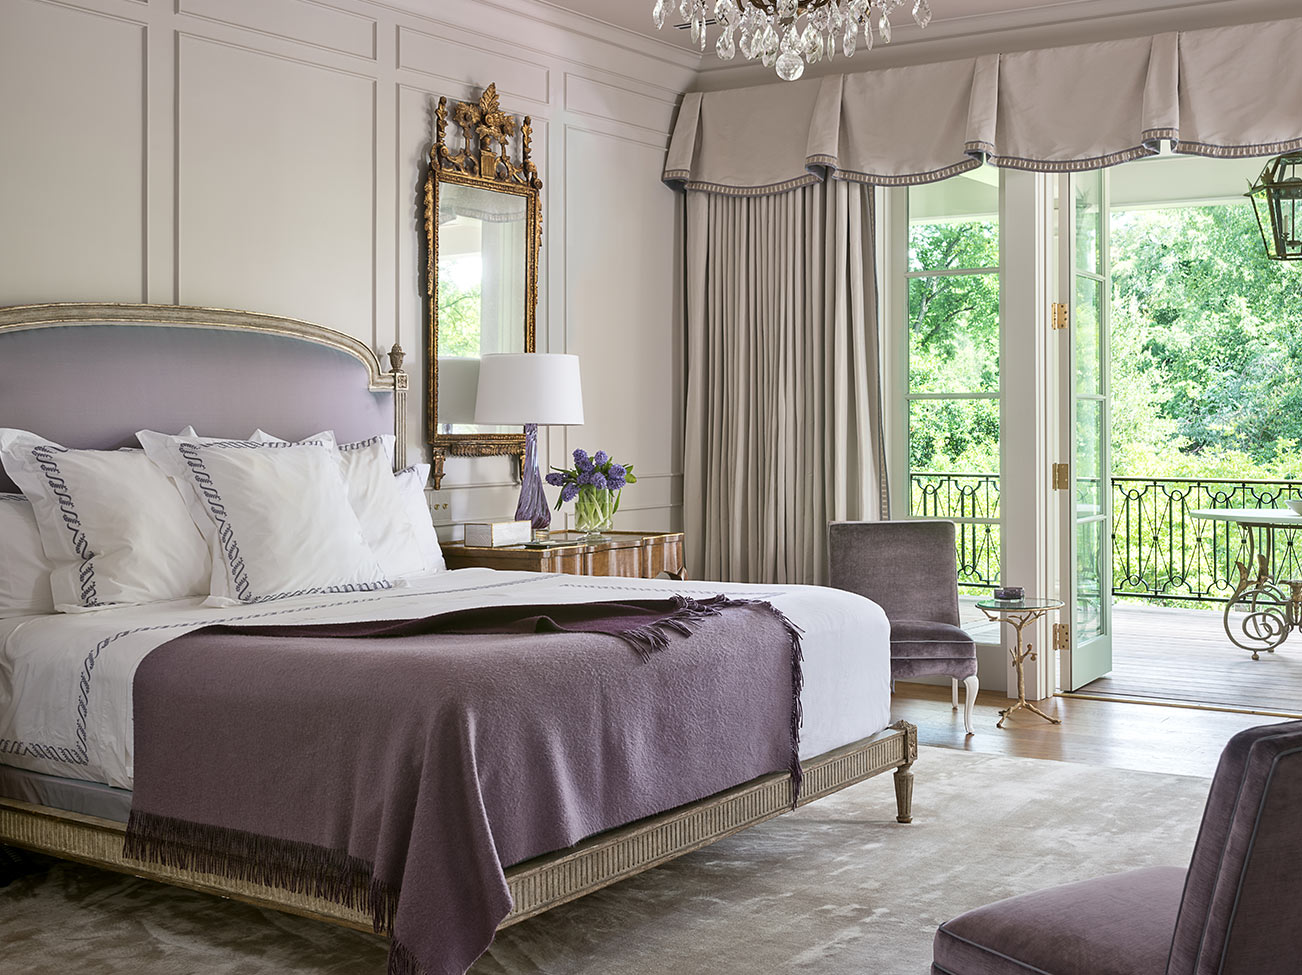 Glamorous light gray and pale lavender bedroom, panelled walls, large king bed, draped windows and door open to terrace.